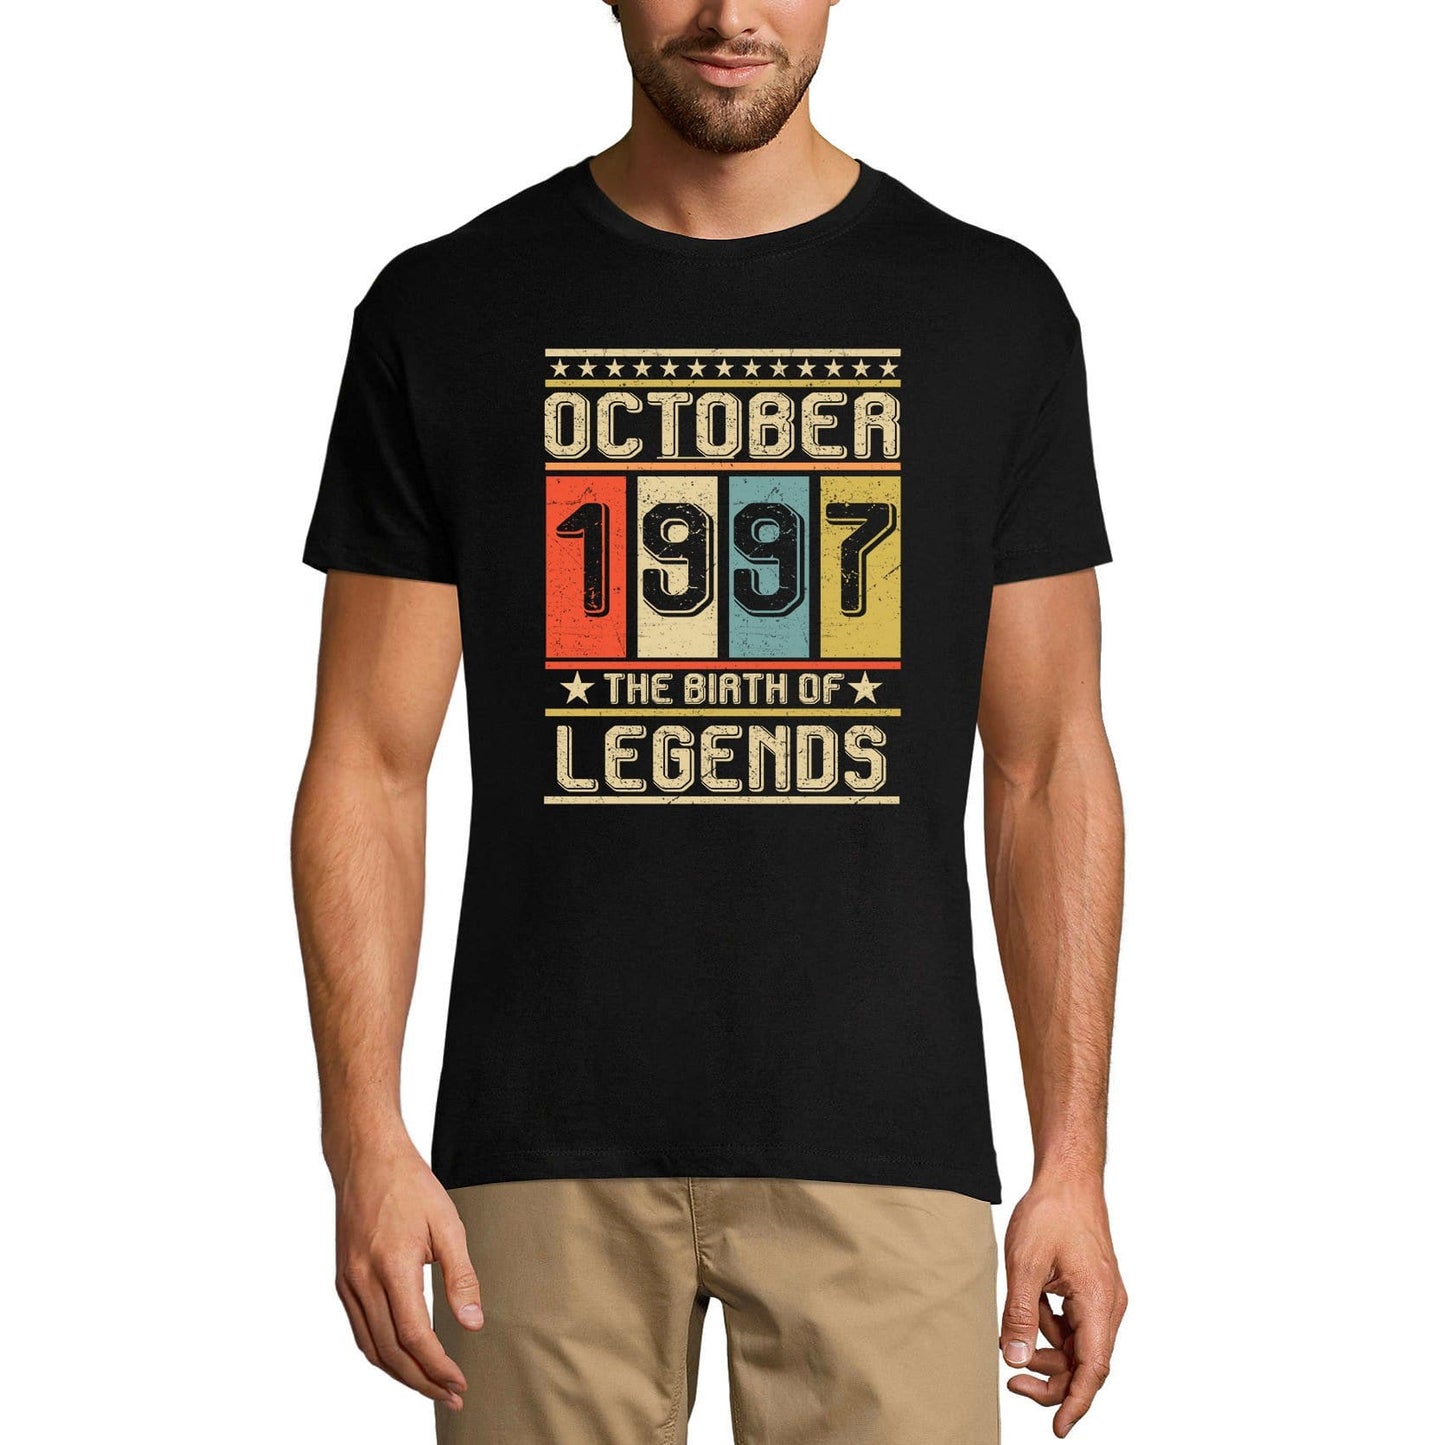 ULTRABASIC Men's Vintage T-Shirt October 1997 the Birth of Legends - 24 Years Old - Gift for 24th Birthday Tee Shirt